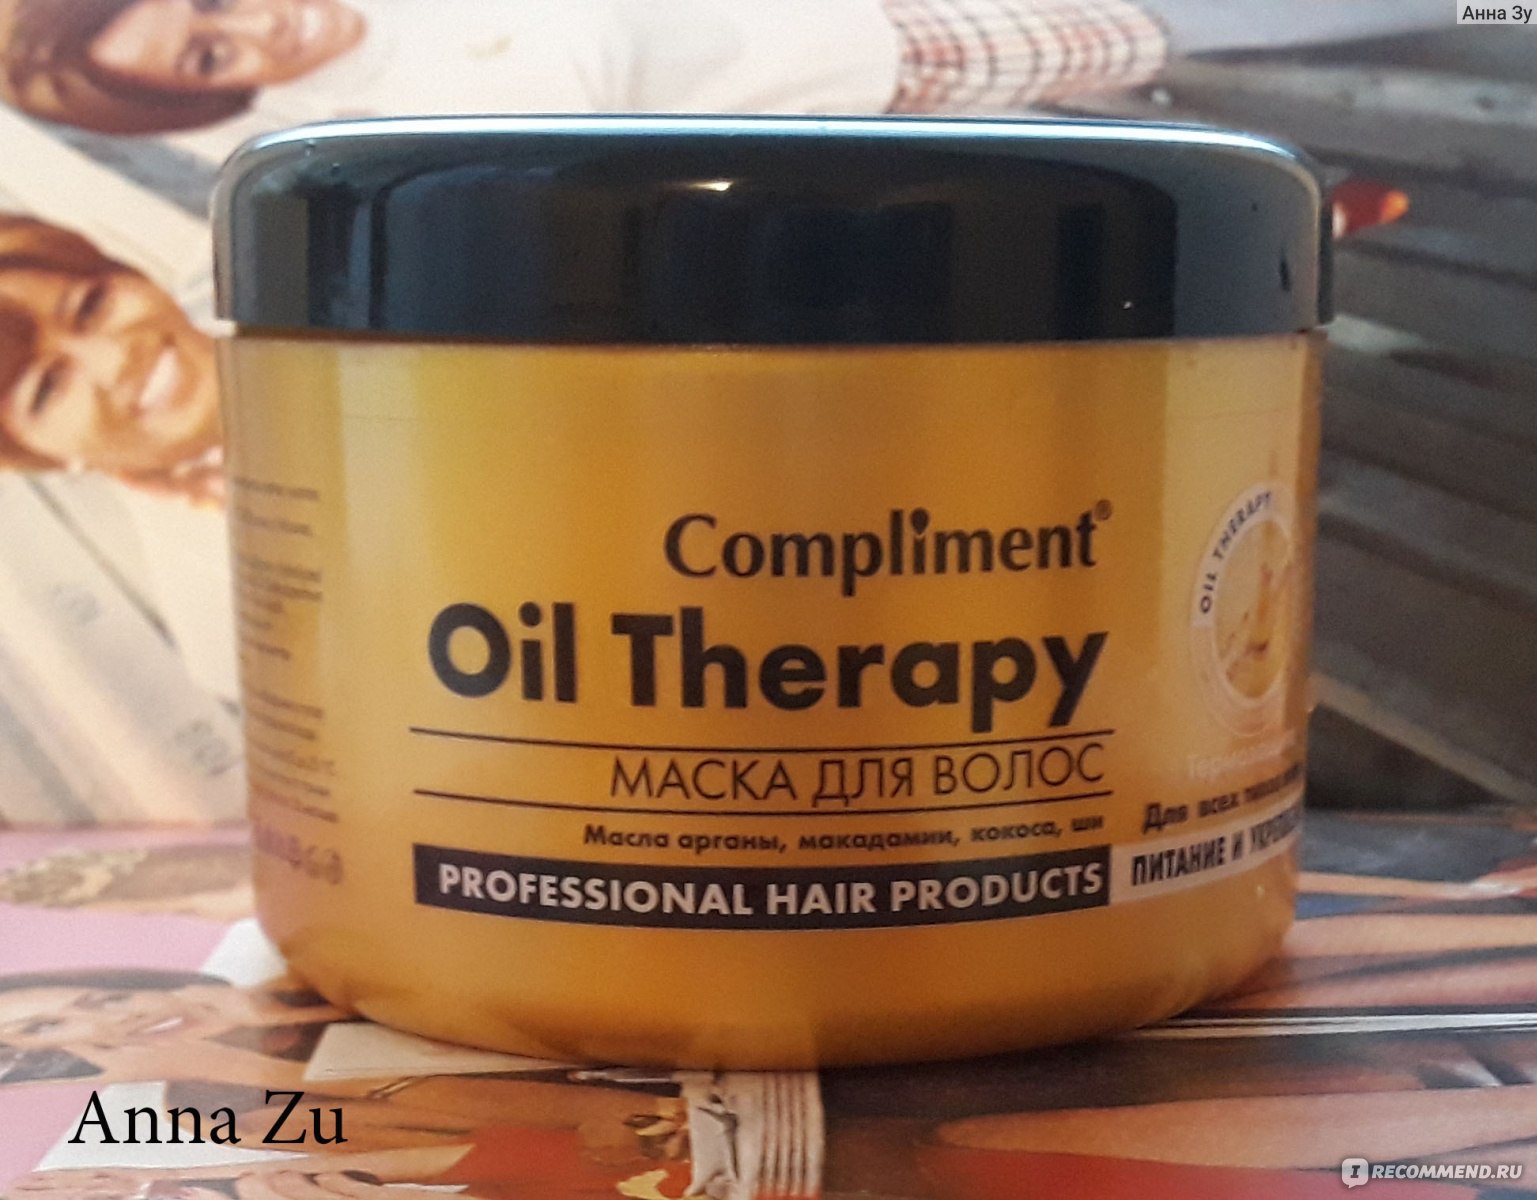 Therapy масло для волос. Маска для волос compliment Oil. Маска для волос Oil Therapy. Маска бальзам Oil Therapy. Маска комплимент Oil Therapy.